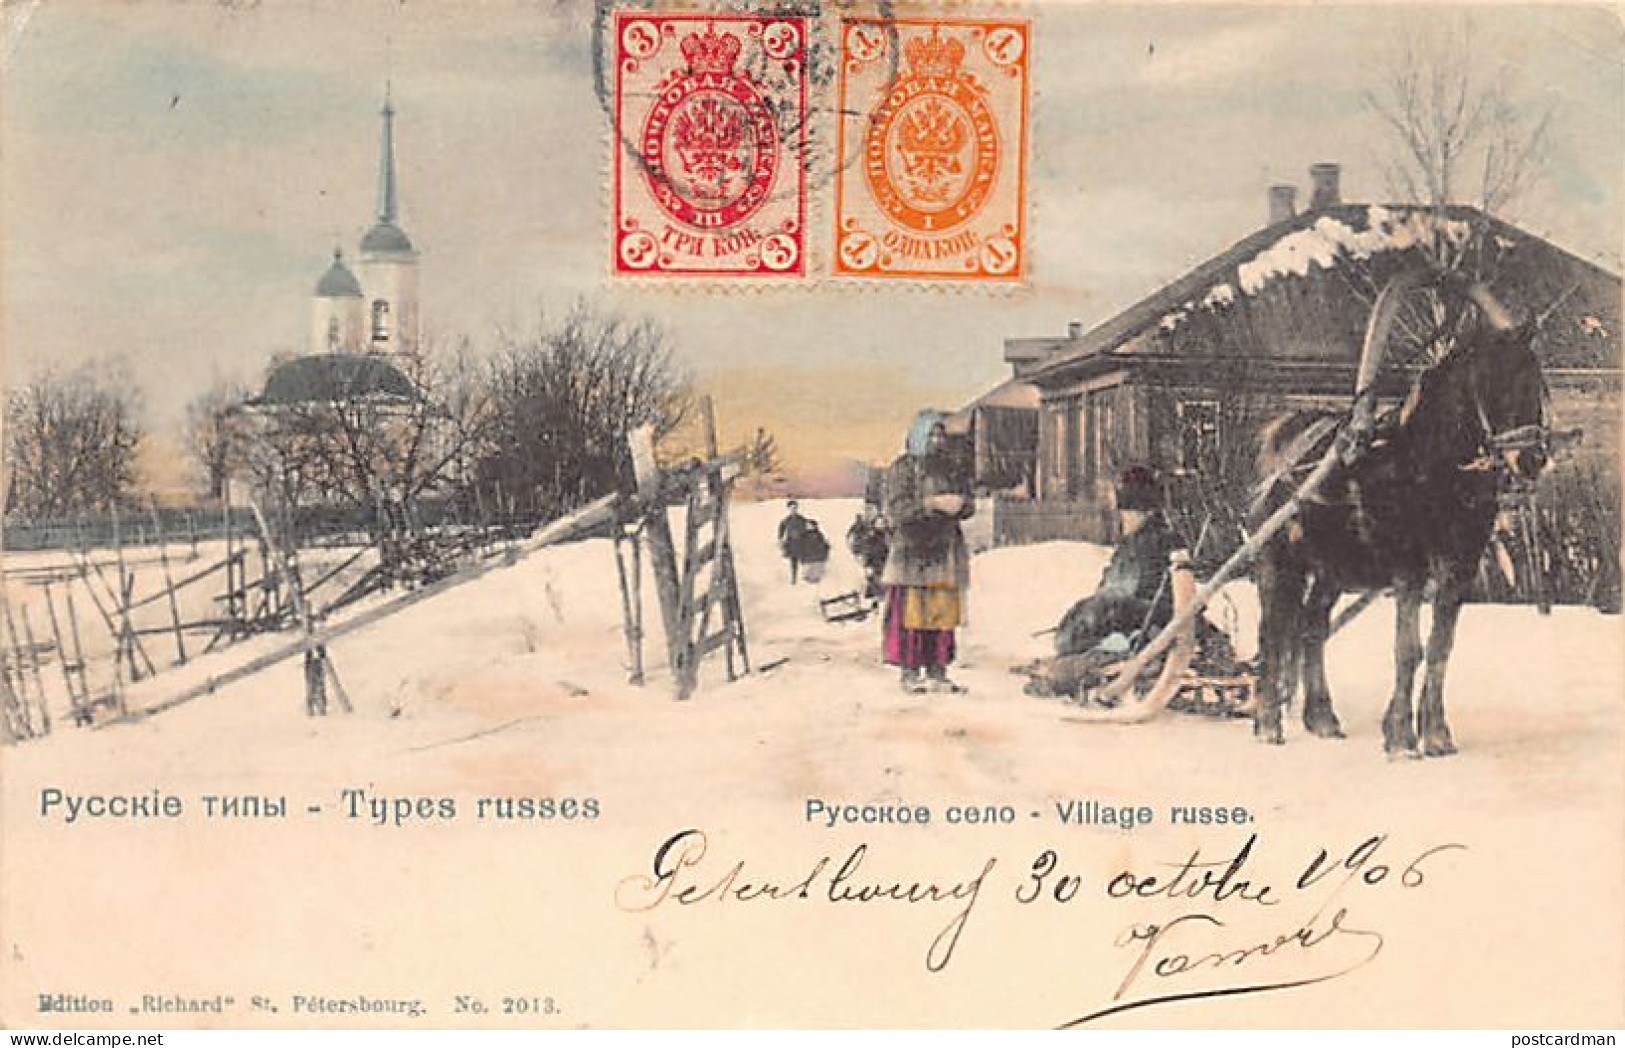 RUSSIA - Russian Types - Russian Village - Sleigh - Publ. Richard 2013 - Russia